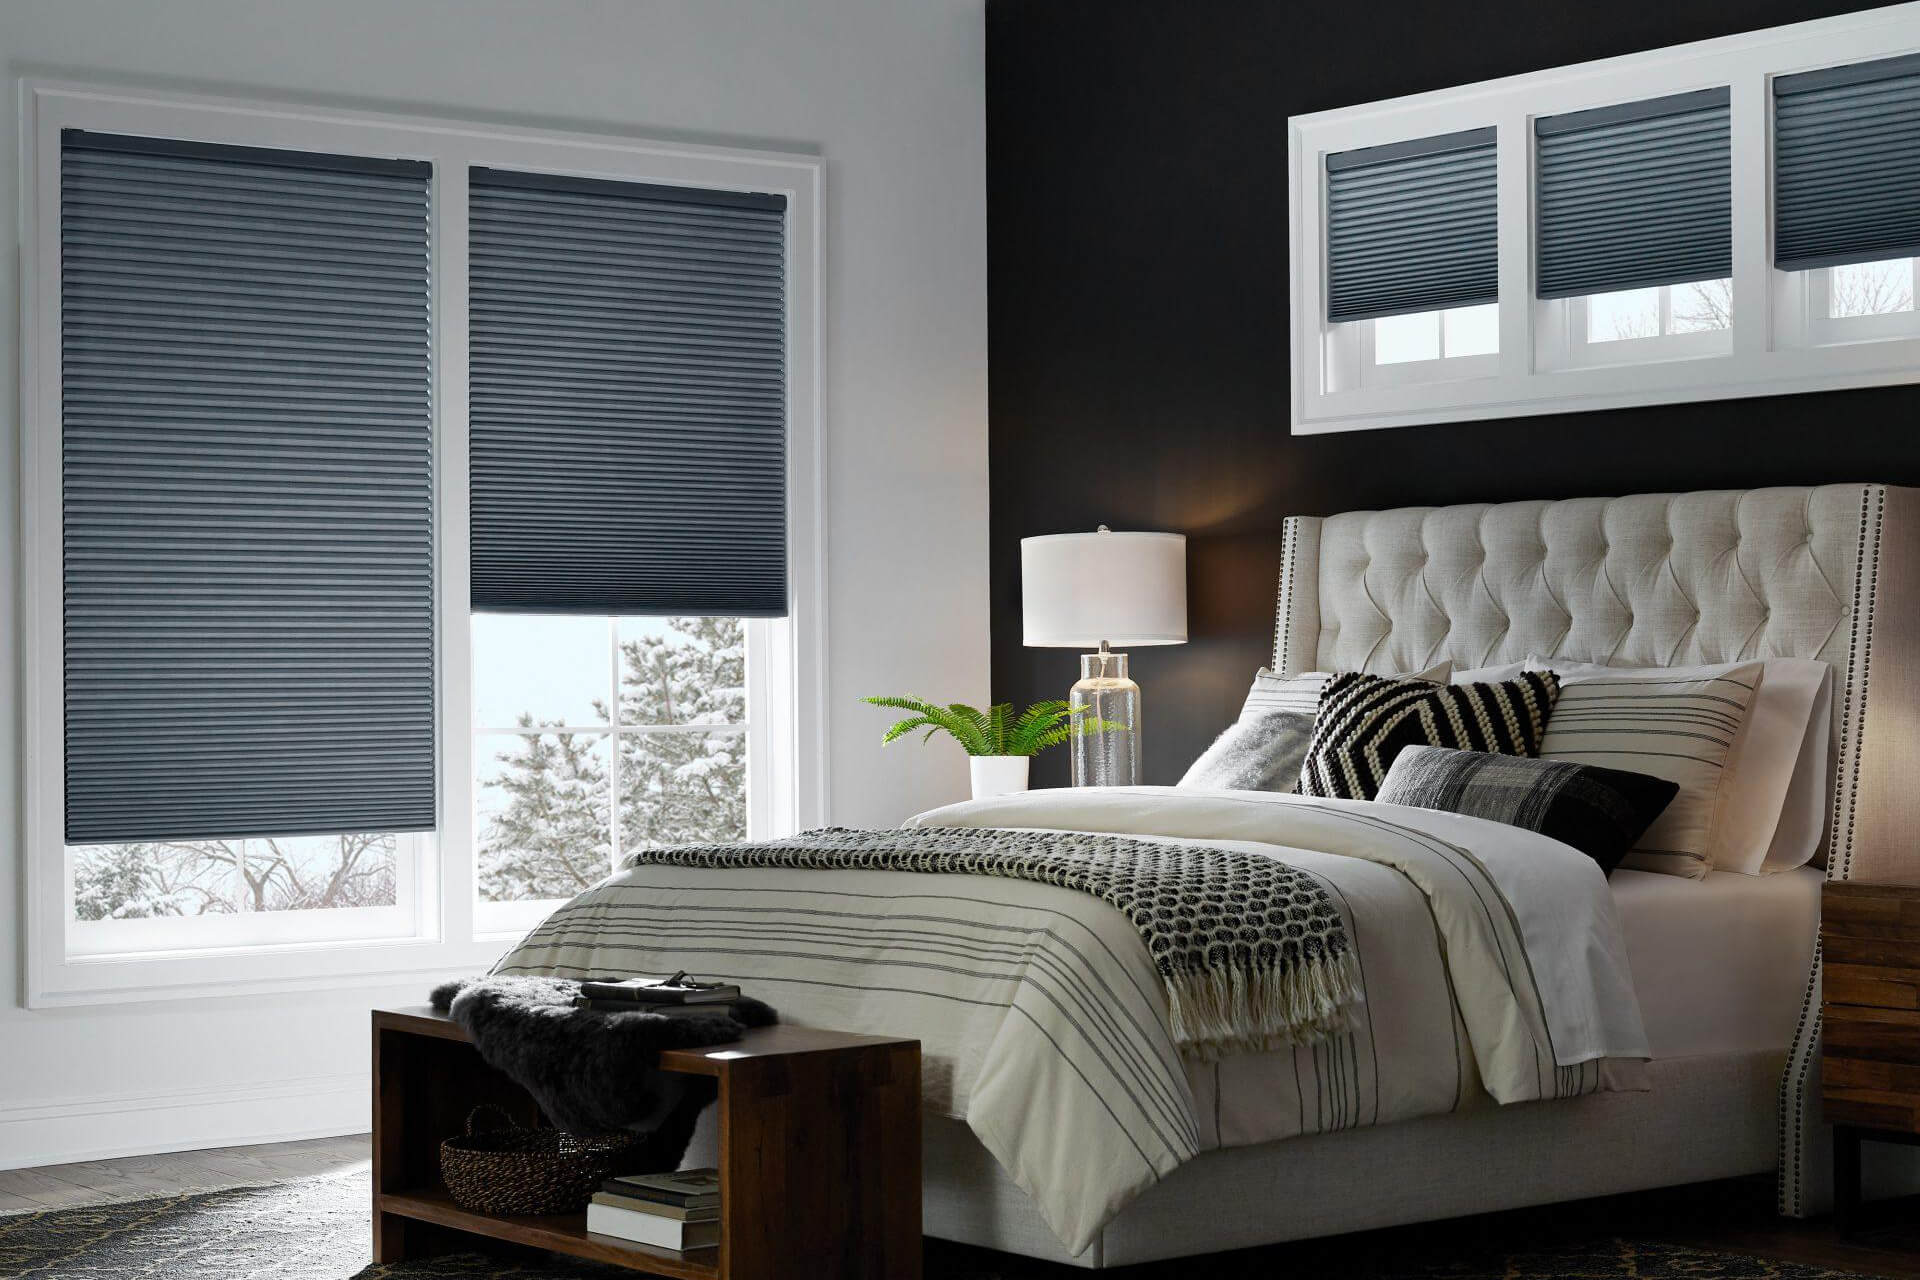 A black and white painted bedroom with dark blue honeycomb shades on two large windows and three smaller windows above the bed.